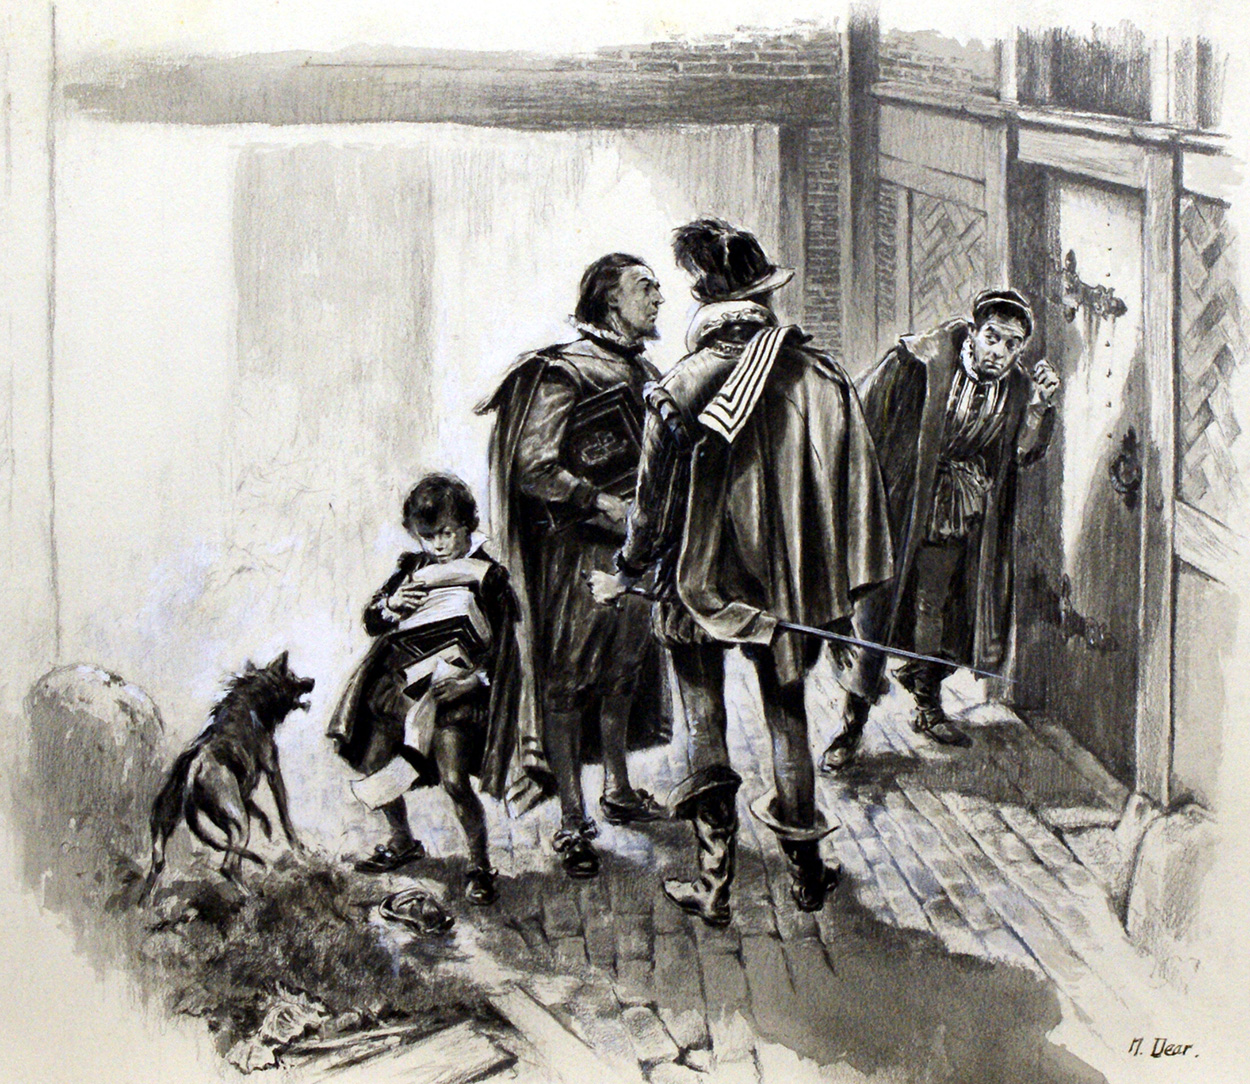 Tax Collectors Vainly Looking for William Shakespeare (Original) (Signed) art by Neville Dear at The Illustration Art Gallery